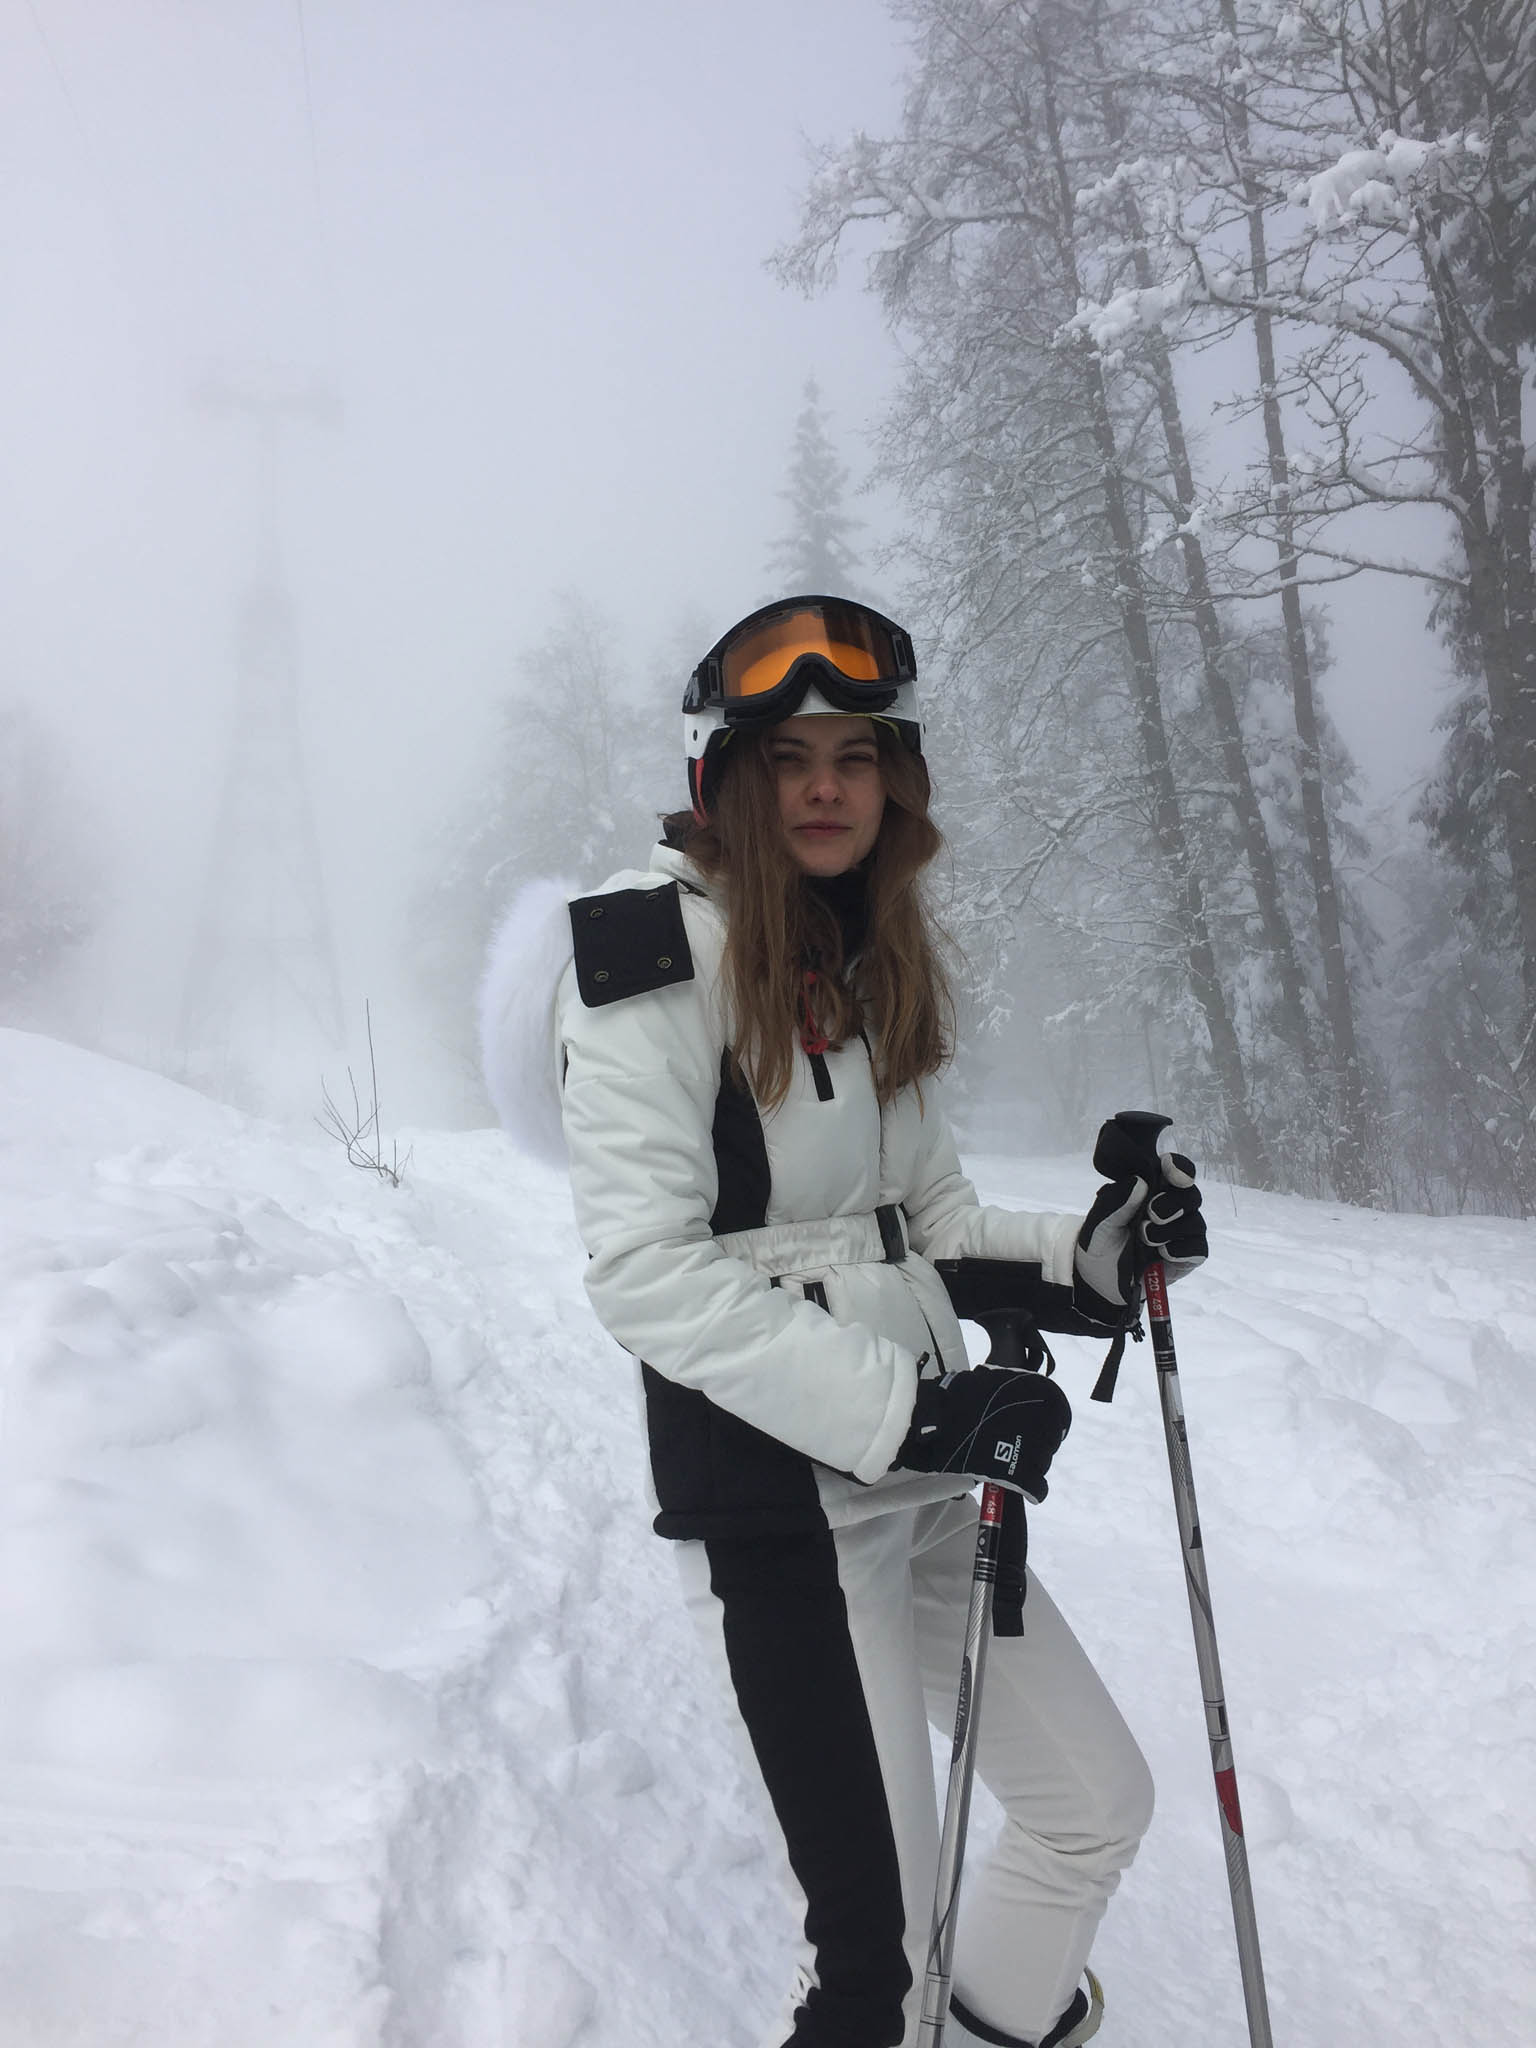 Learning how to ski in my 30s | APOPLOUS